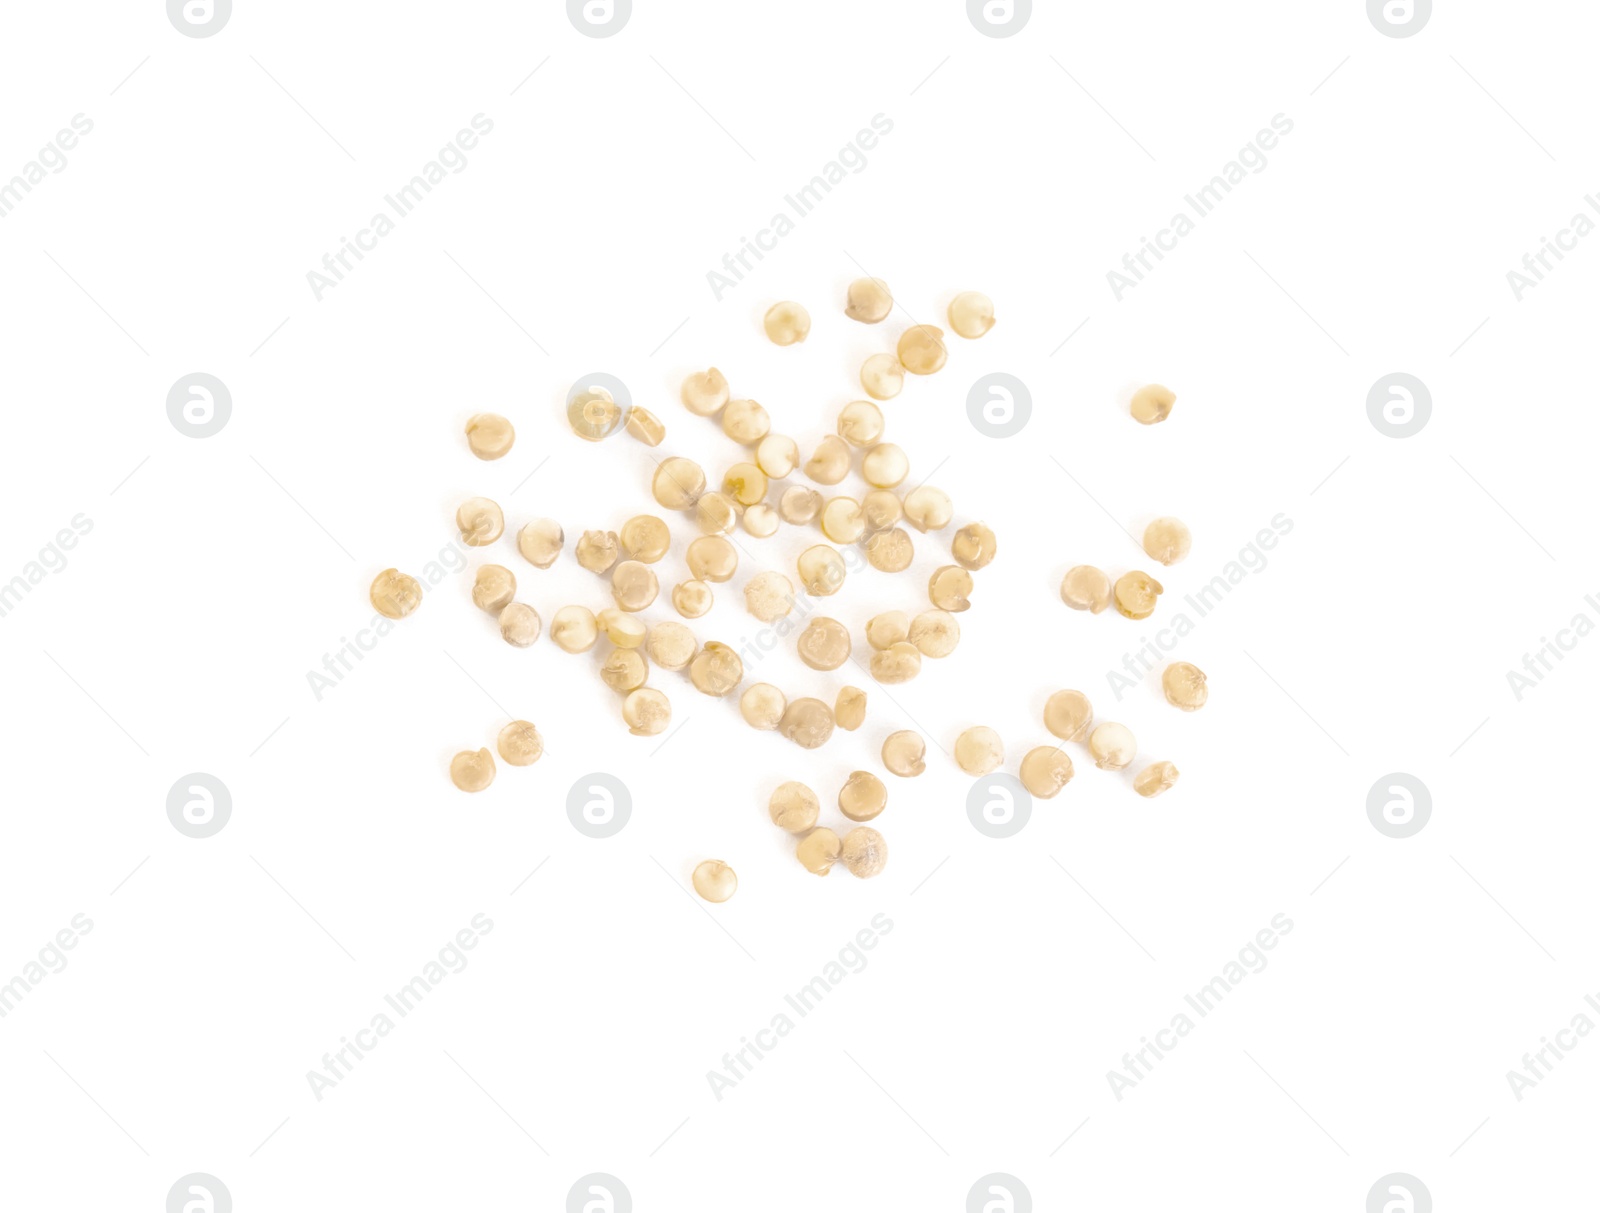 Photo of Raw quinoa on white background, top view